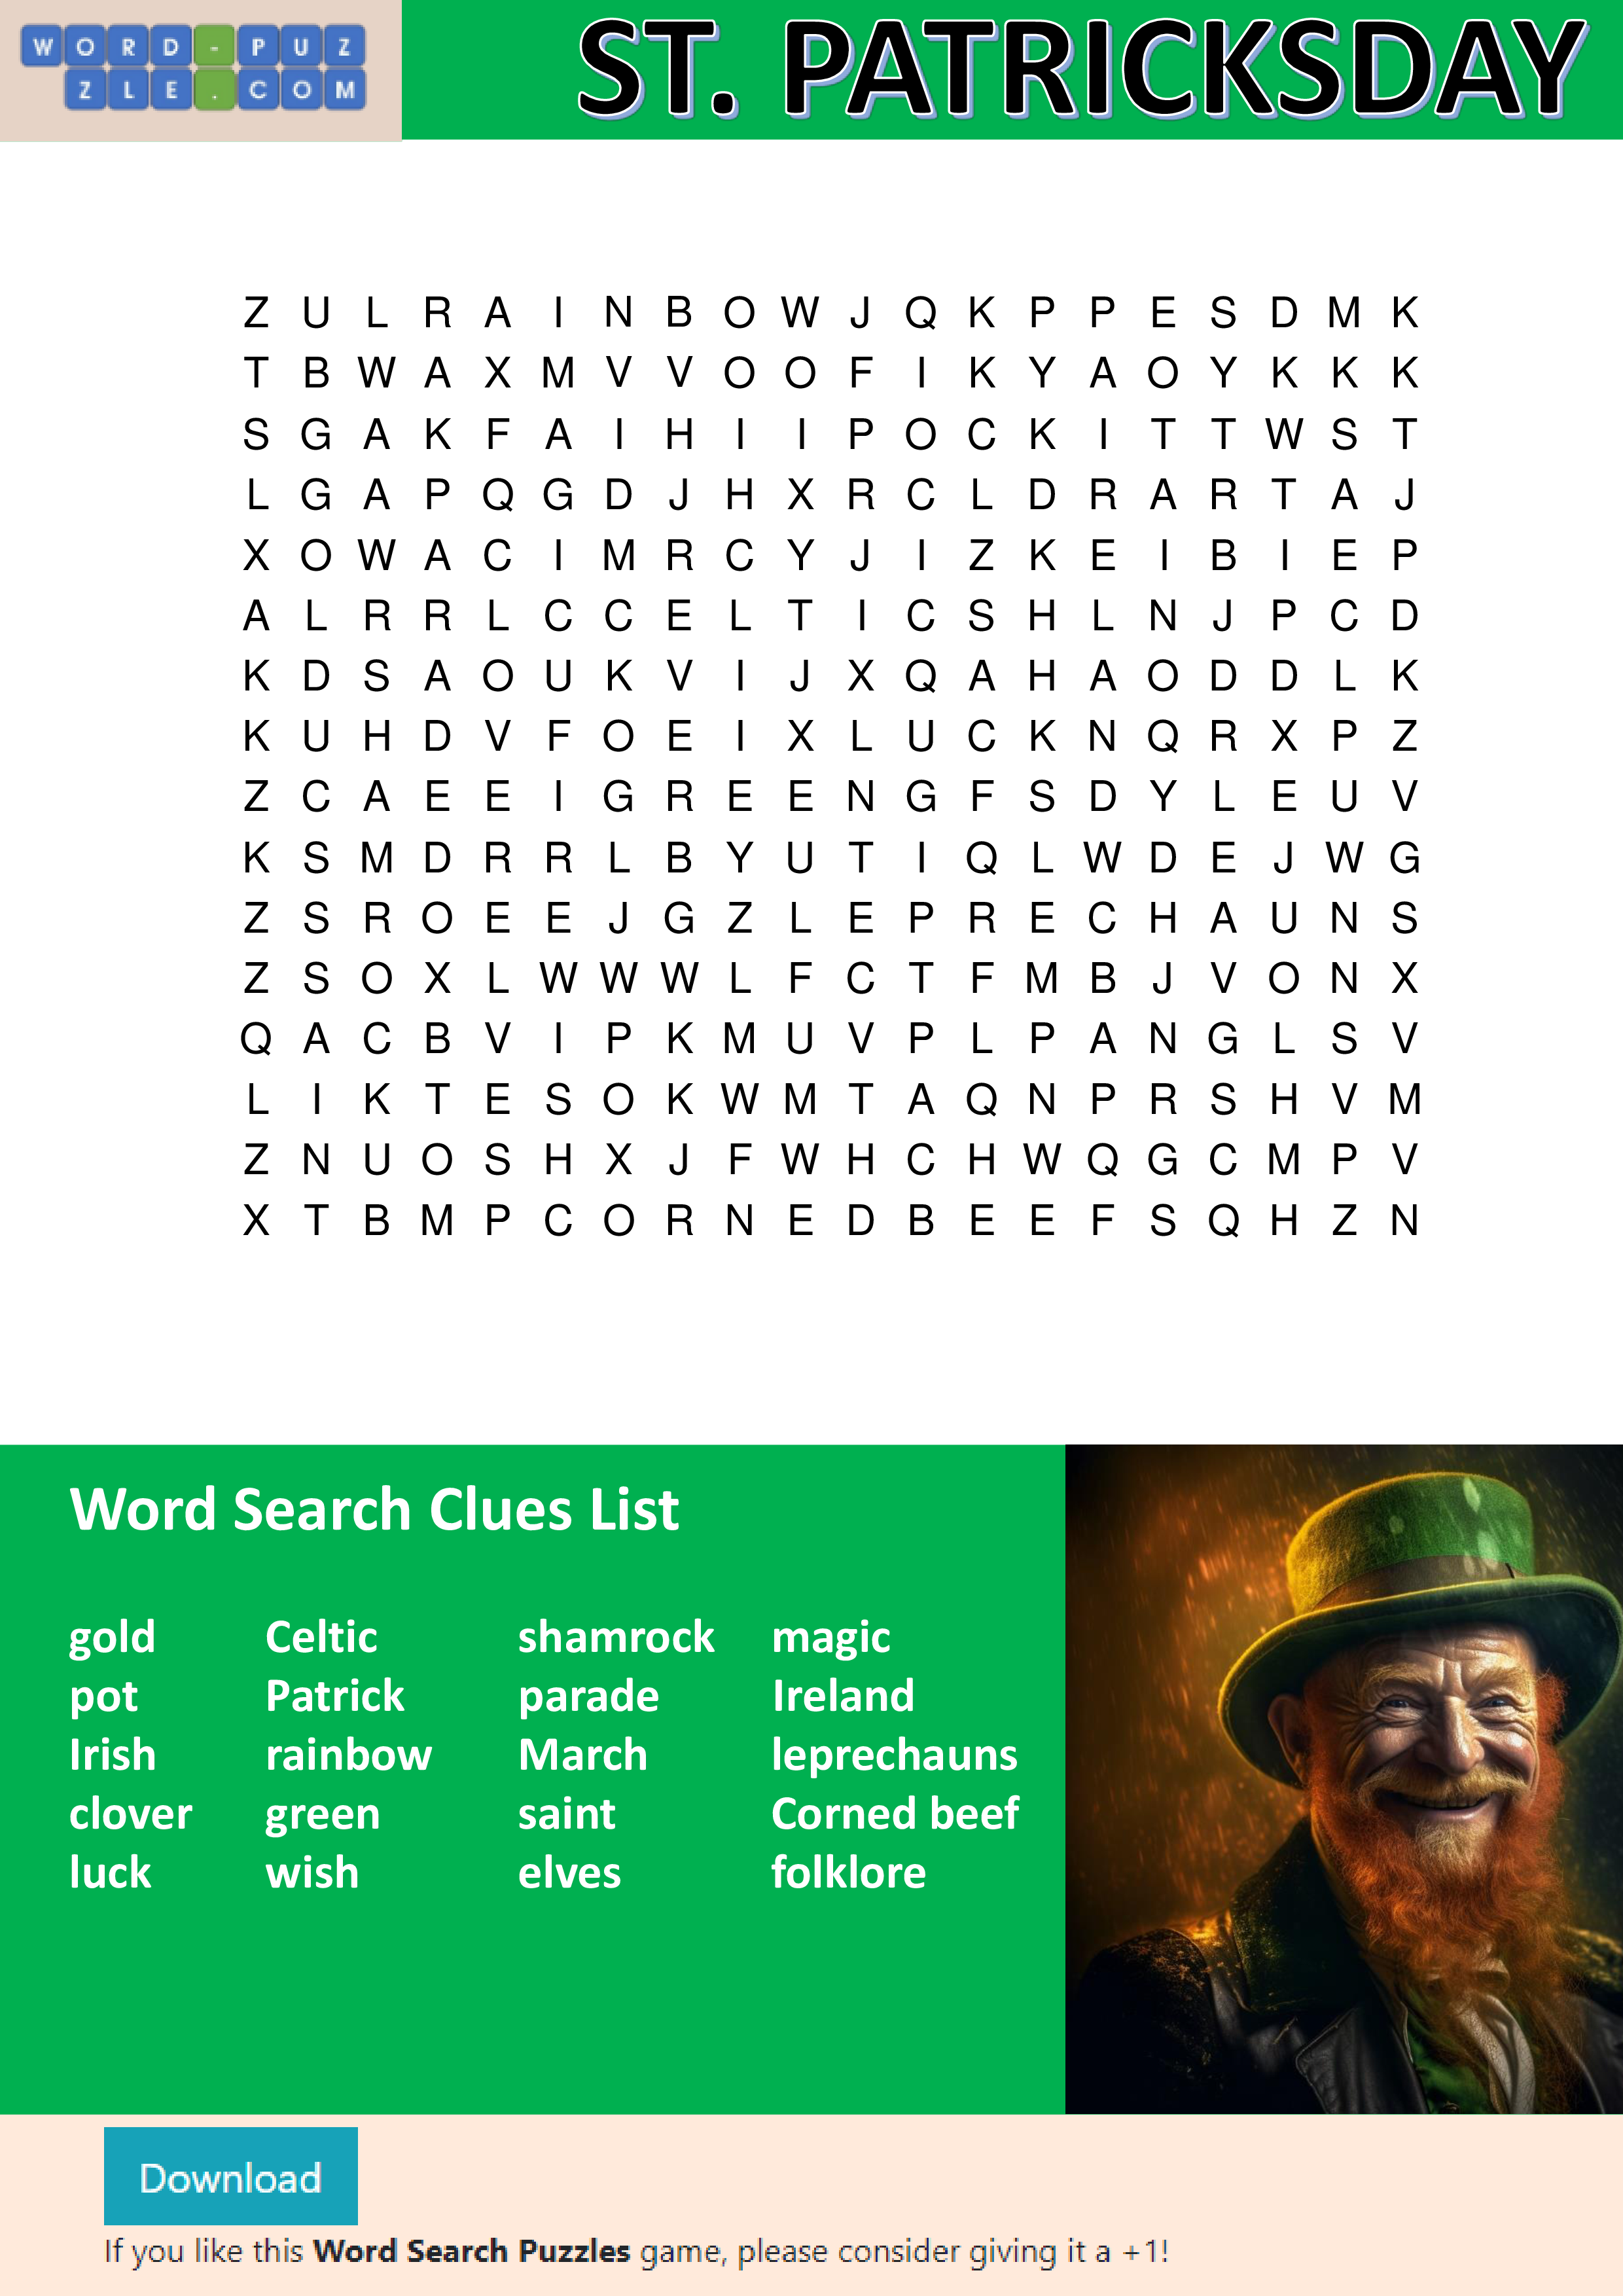 Saint Patrick's day word search main image